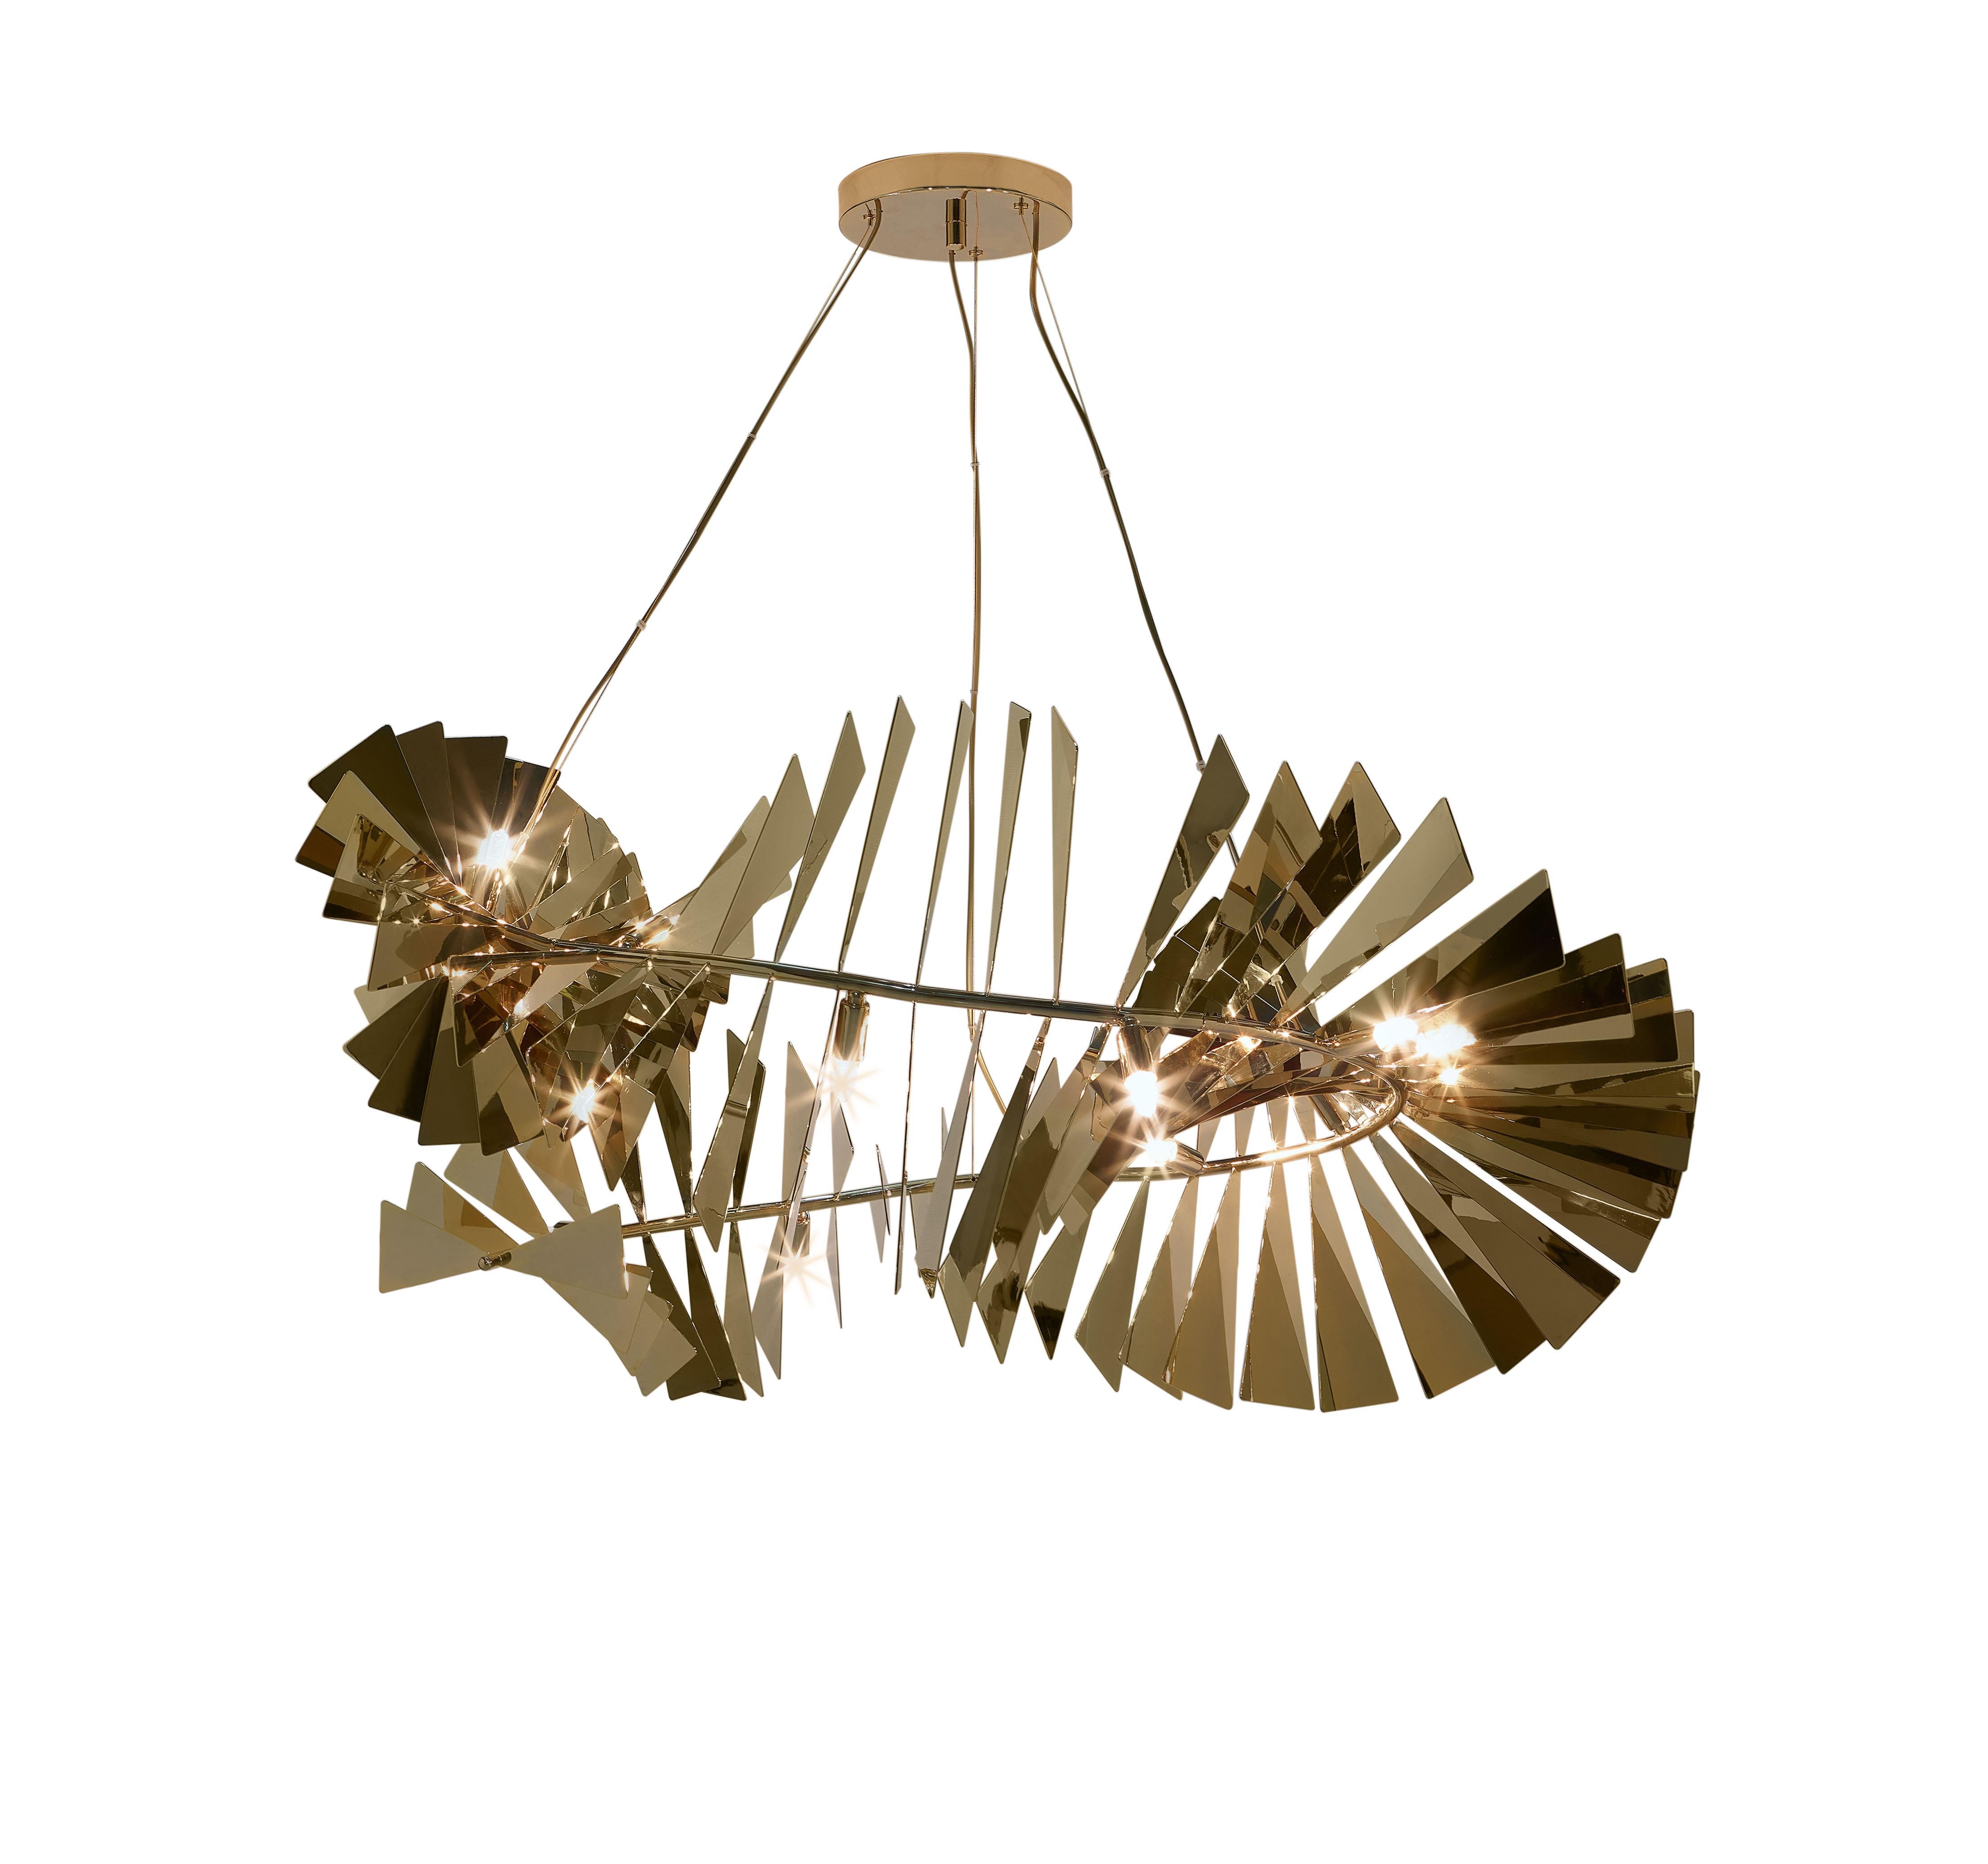 Revolution Large Suspension Lamp by Memoir Essence
Dimensions: D 130 x W 130 x H 66,5 cm.
Materials: Polished brass gold plated.

Revolution is a suspension lamp, a true revolution of brass curved slices, combined in a vortex shape, capable of